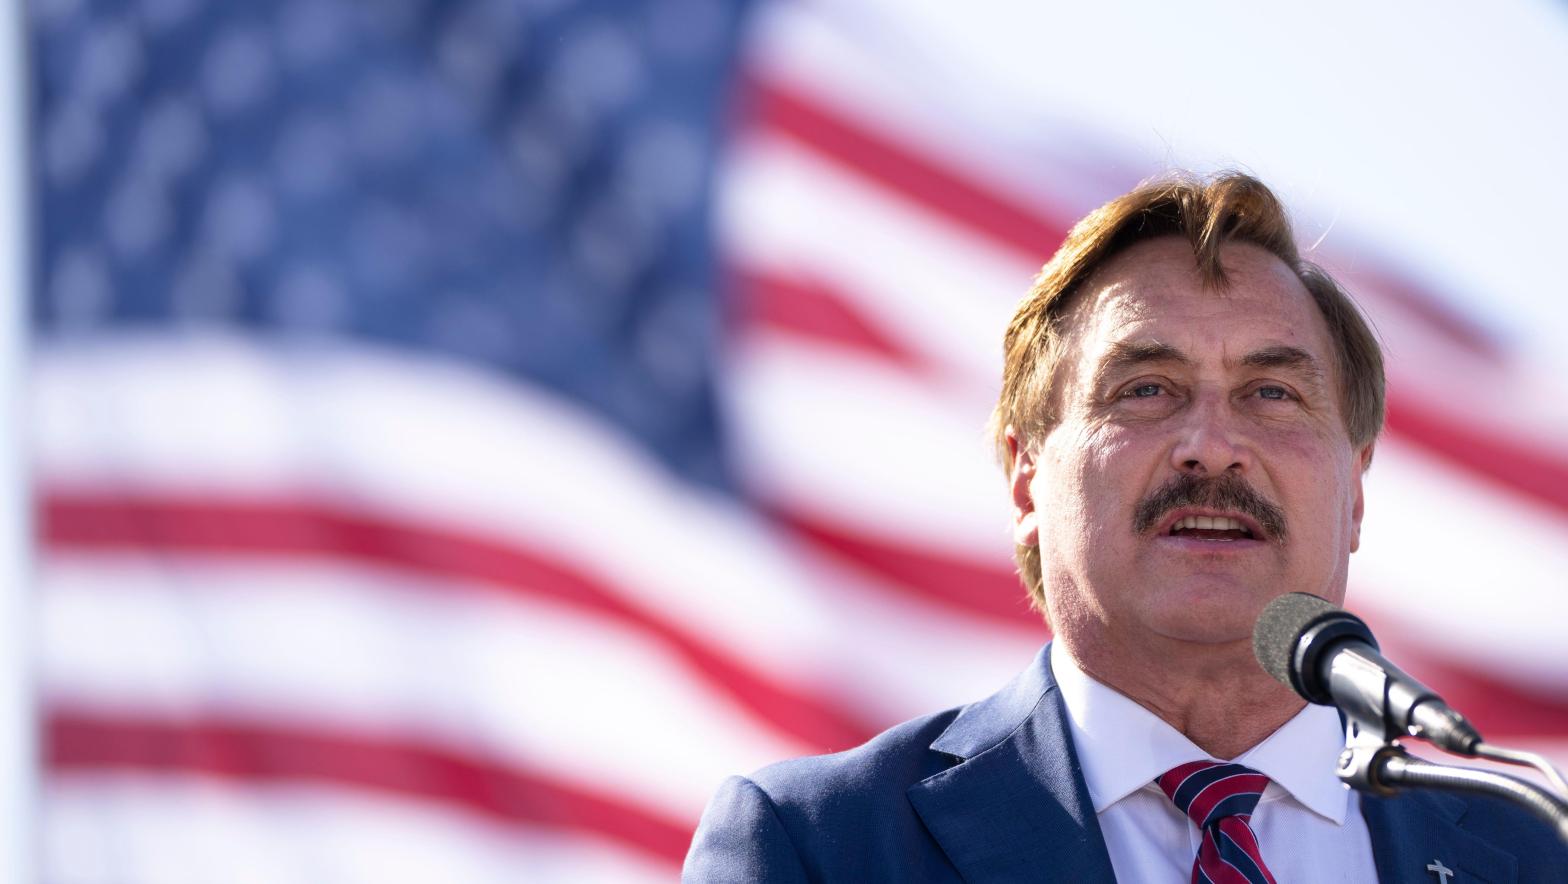 Mike Lindell has not been shy about his beliefs that the 2020 election was stolen.  (Image: Drew Angerer, Getty Images)